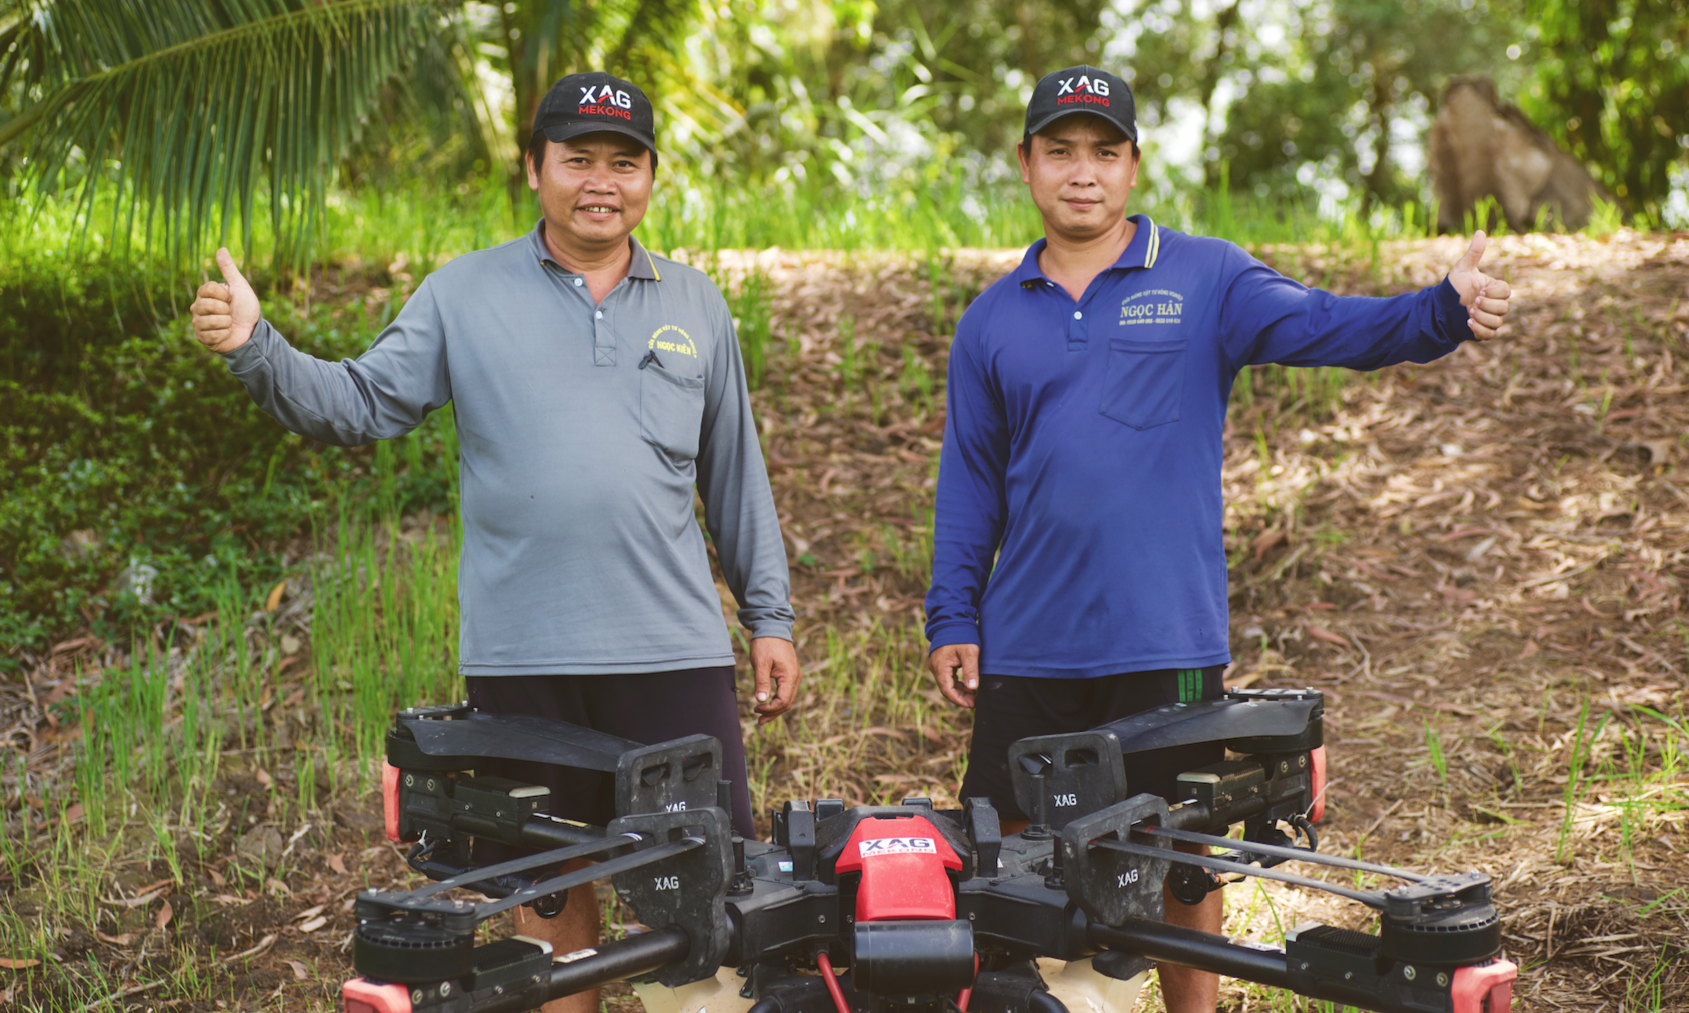 XAG P100 Drone: The Game Changer for Vietnam Rice Farmers Amid Rising Input Costs